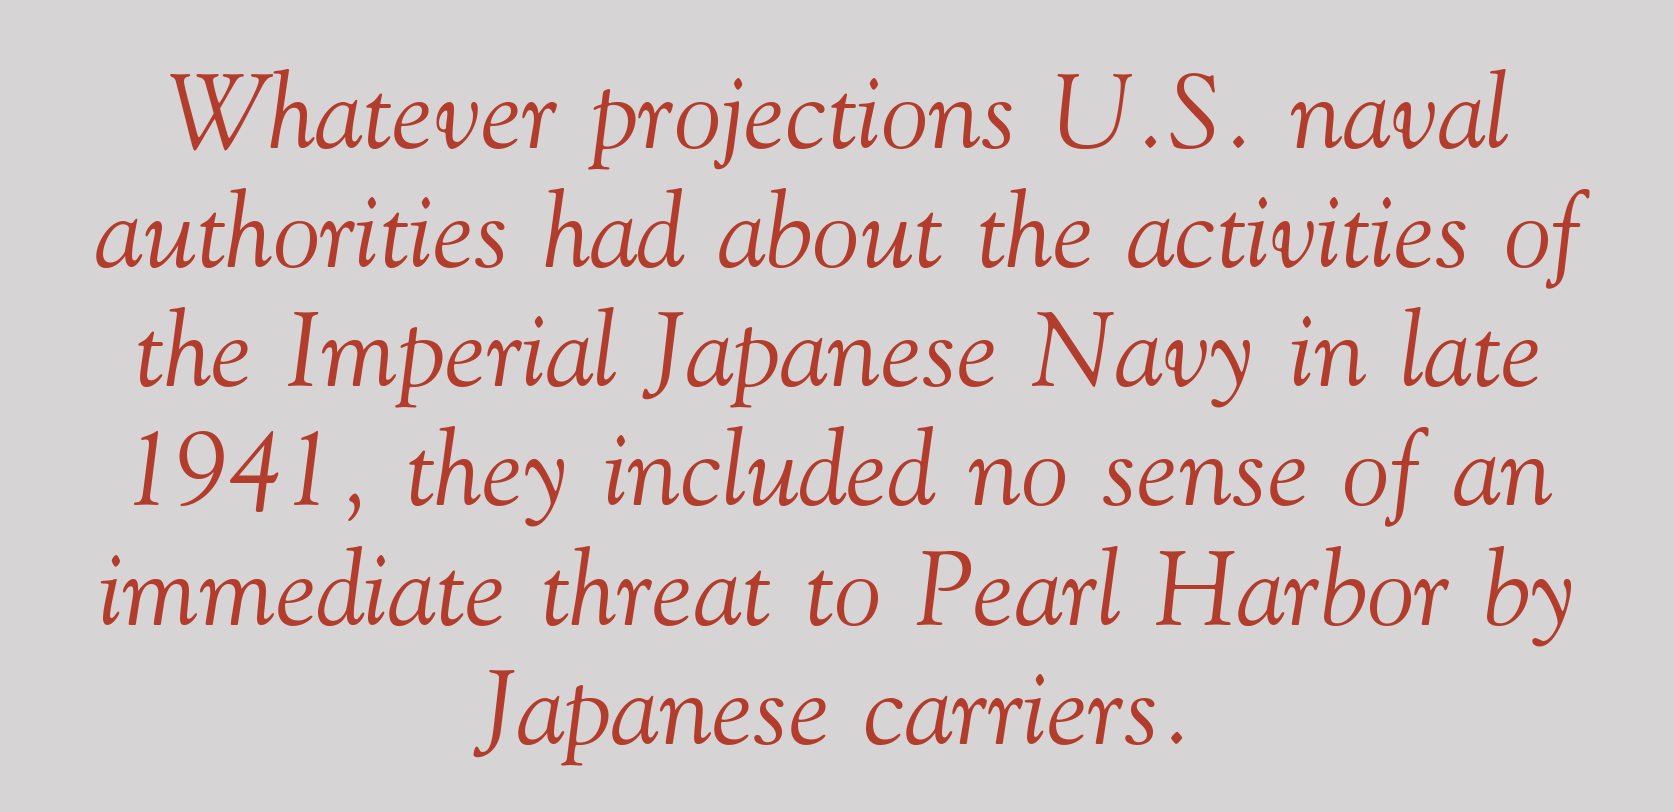 Whatever projections U.S. naval authorities had about the activities of the Imperial Japanese Navy in late 1941, they included no sense of an immediate threat to Pearl Harbor by Japanese carriers.